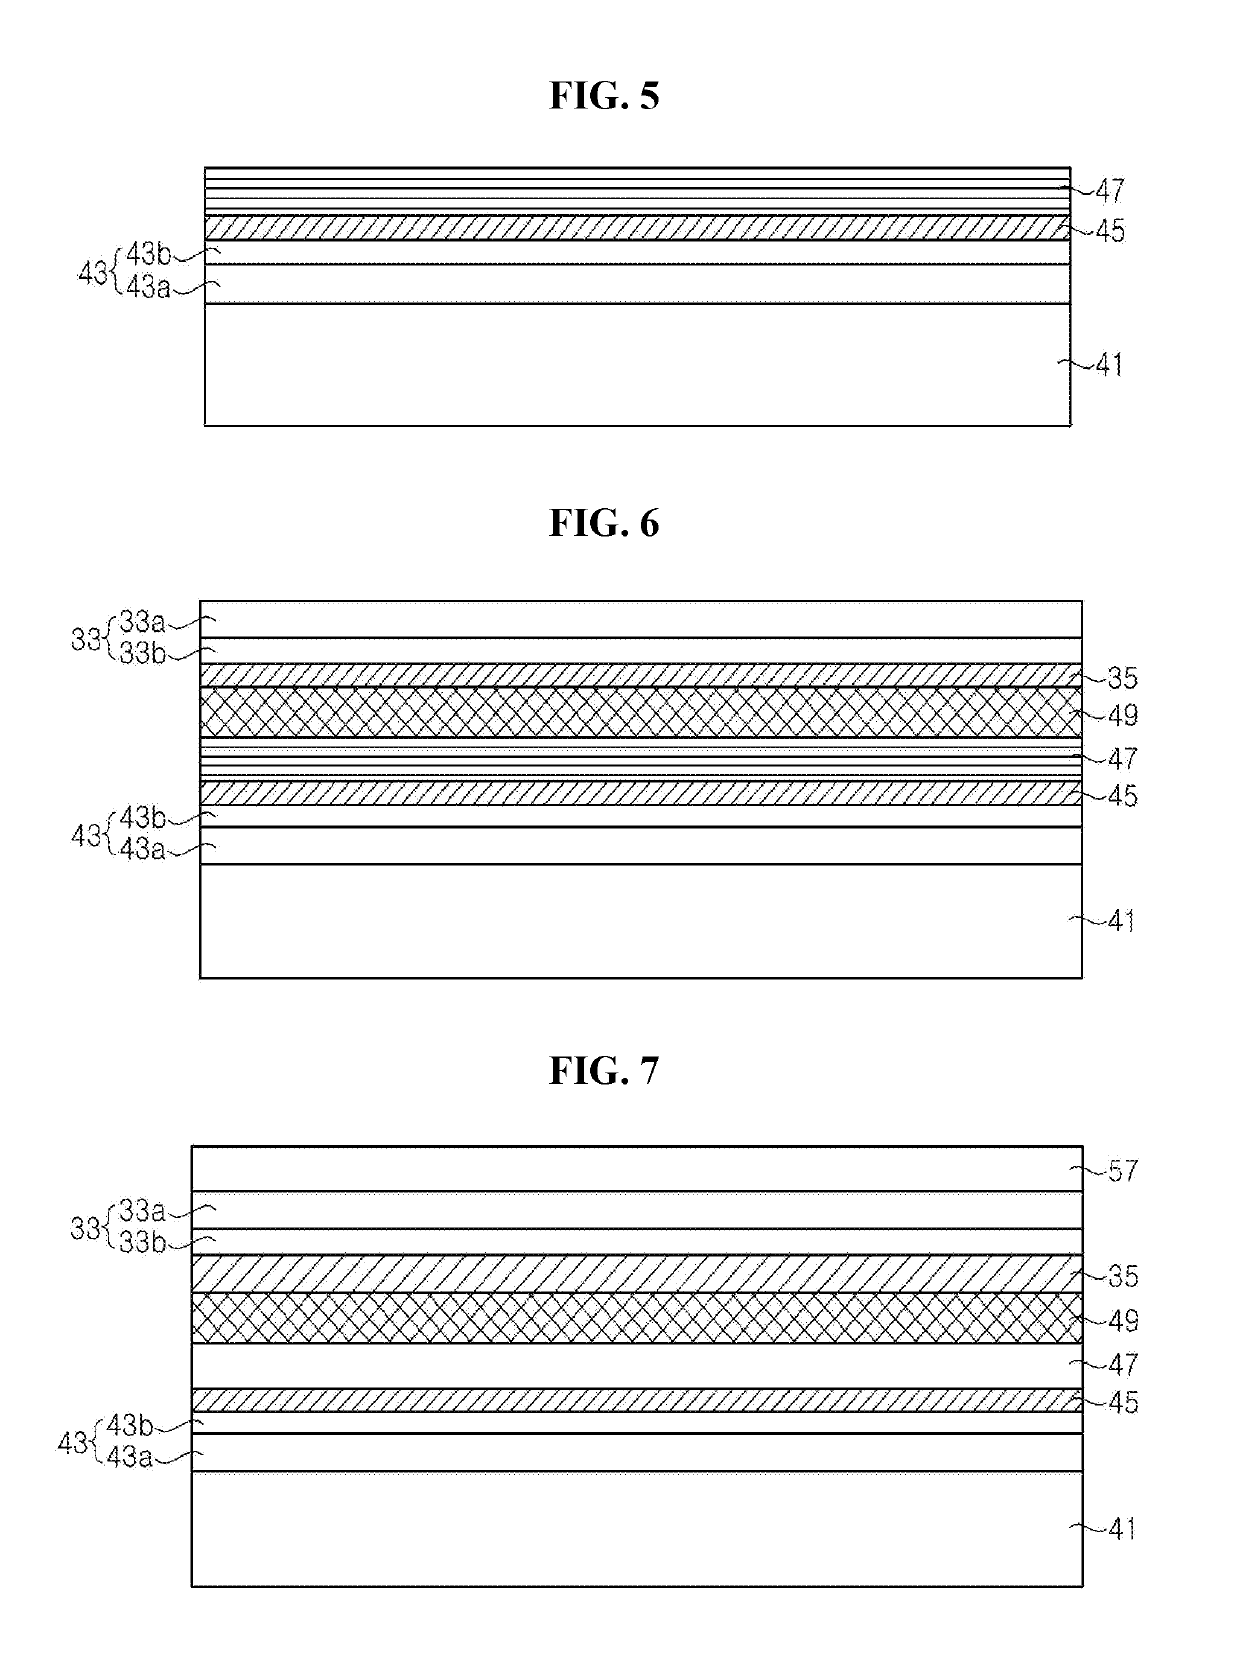 LED unit for display and display apparatus having the same